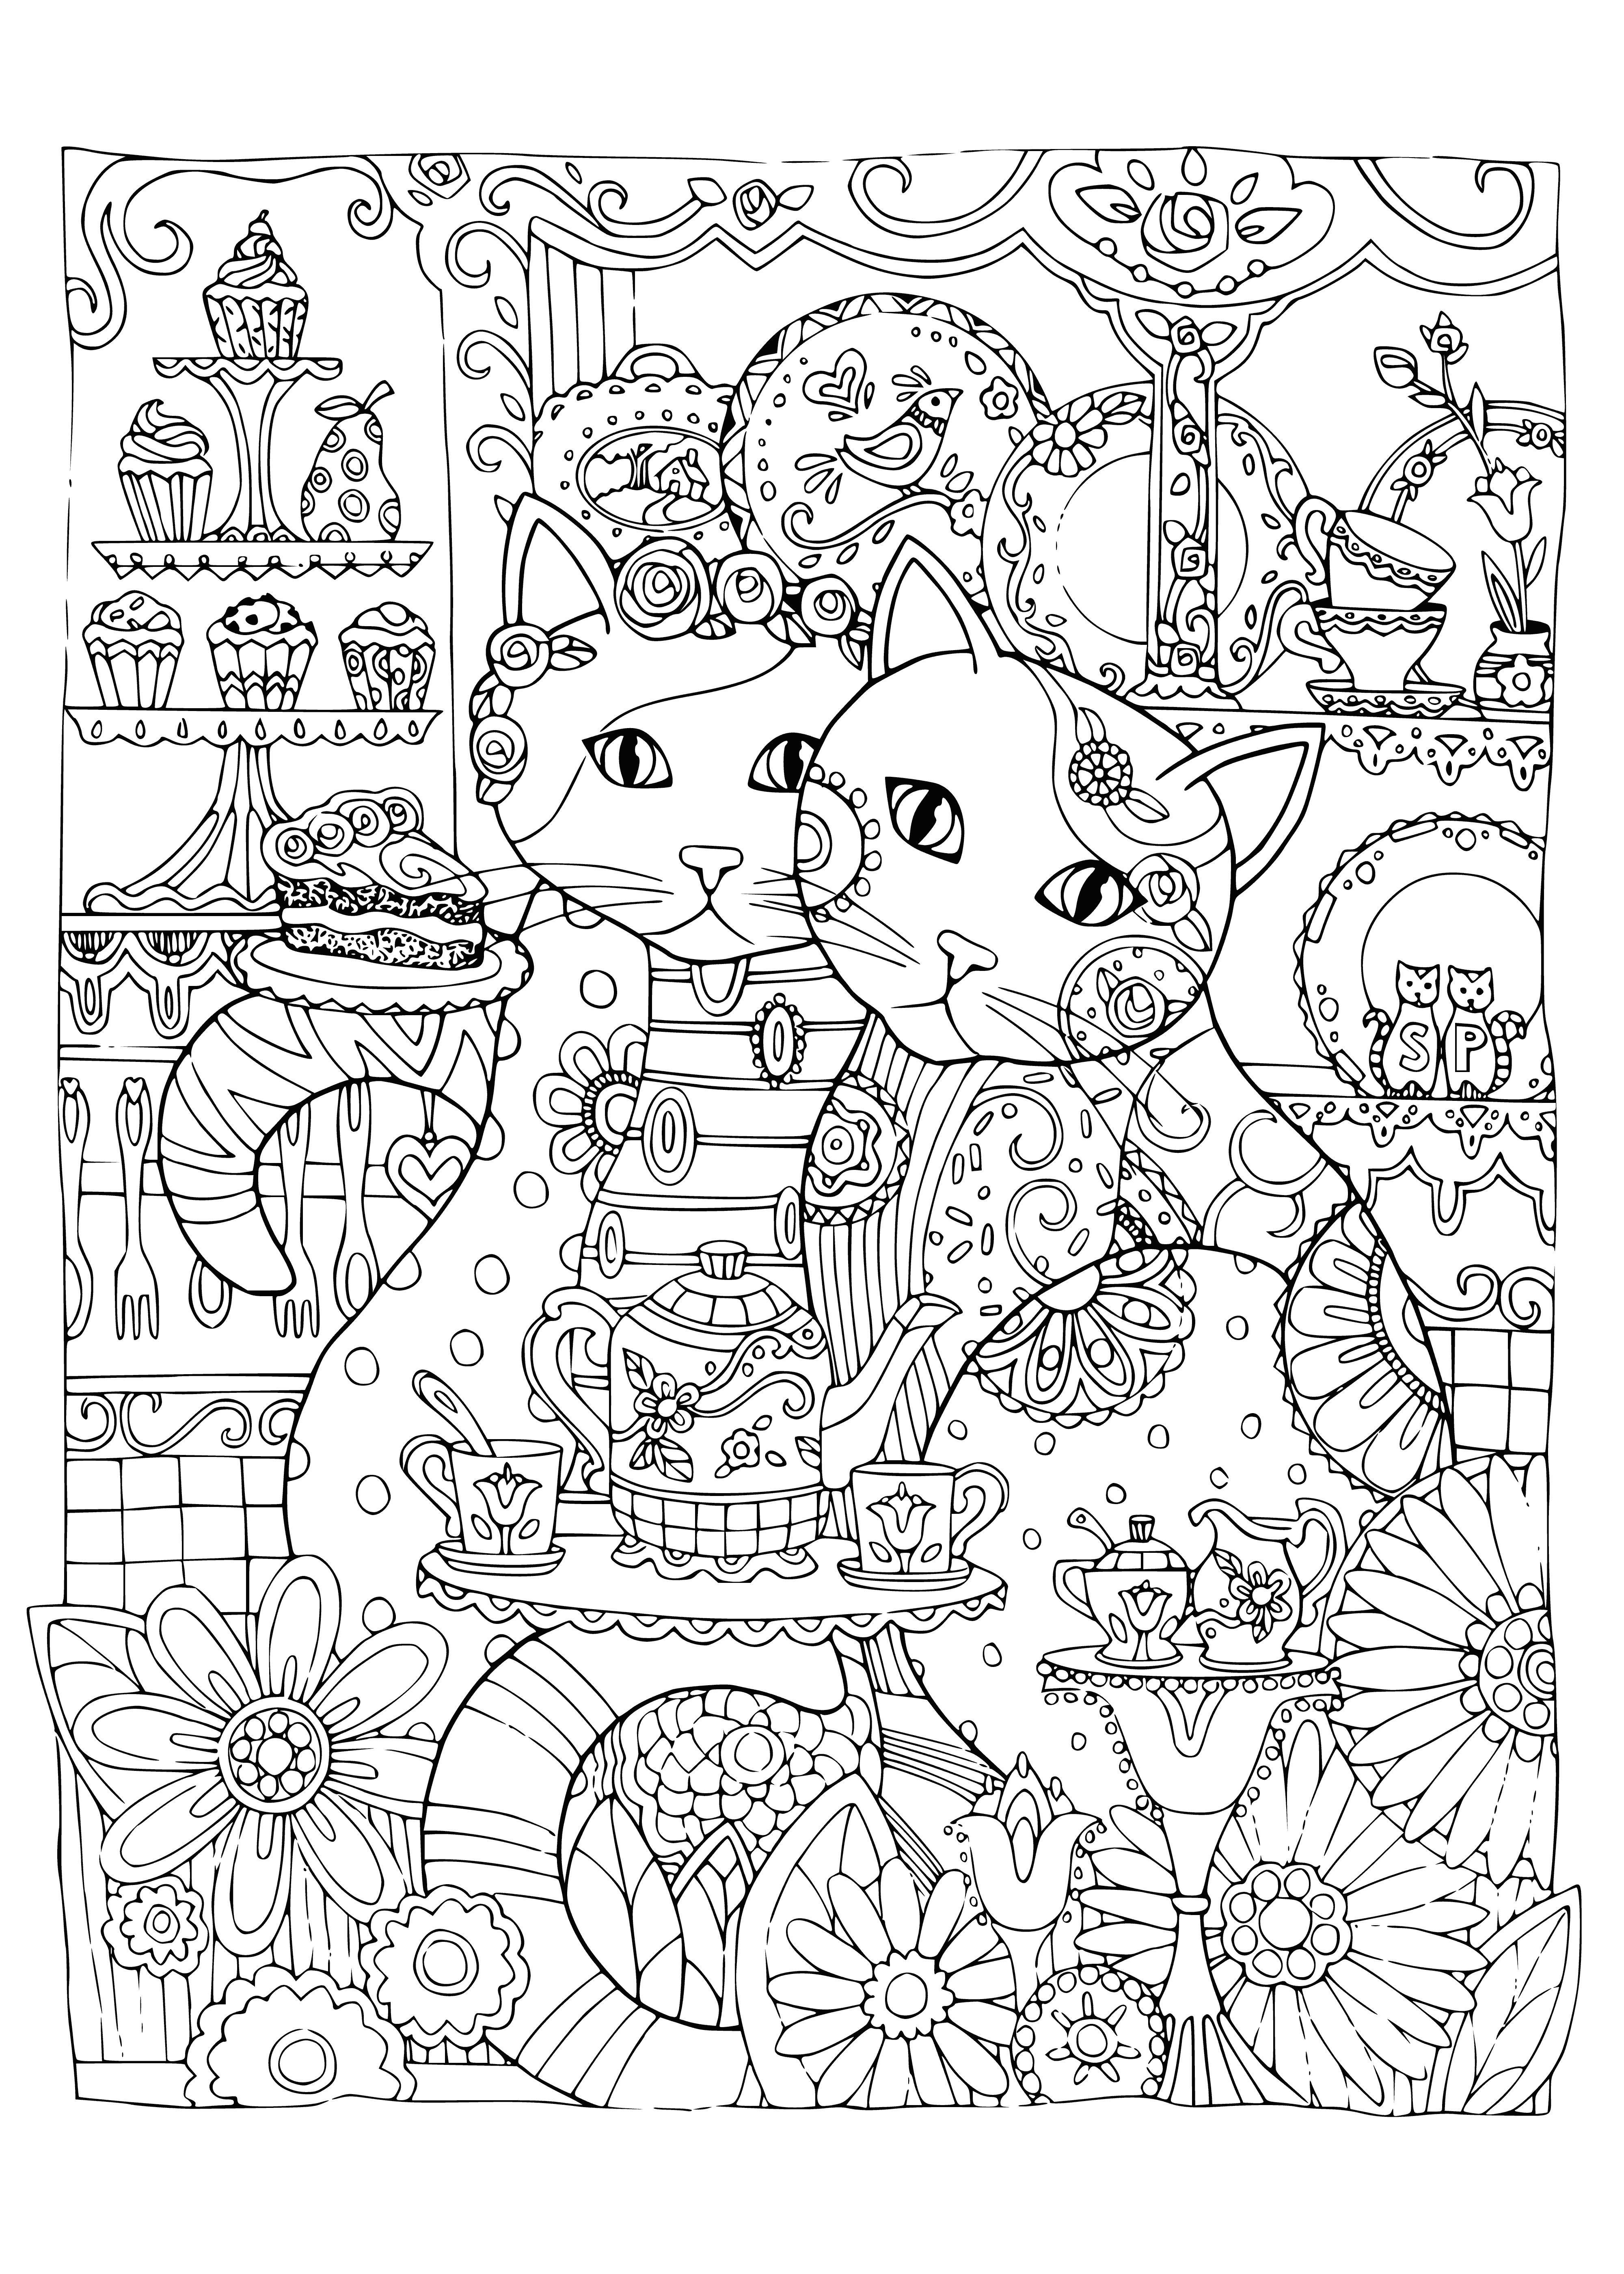 coloring page: Cats relax in a cafe surrounded by plants, creating a peaceful atmosphere.